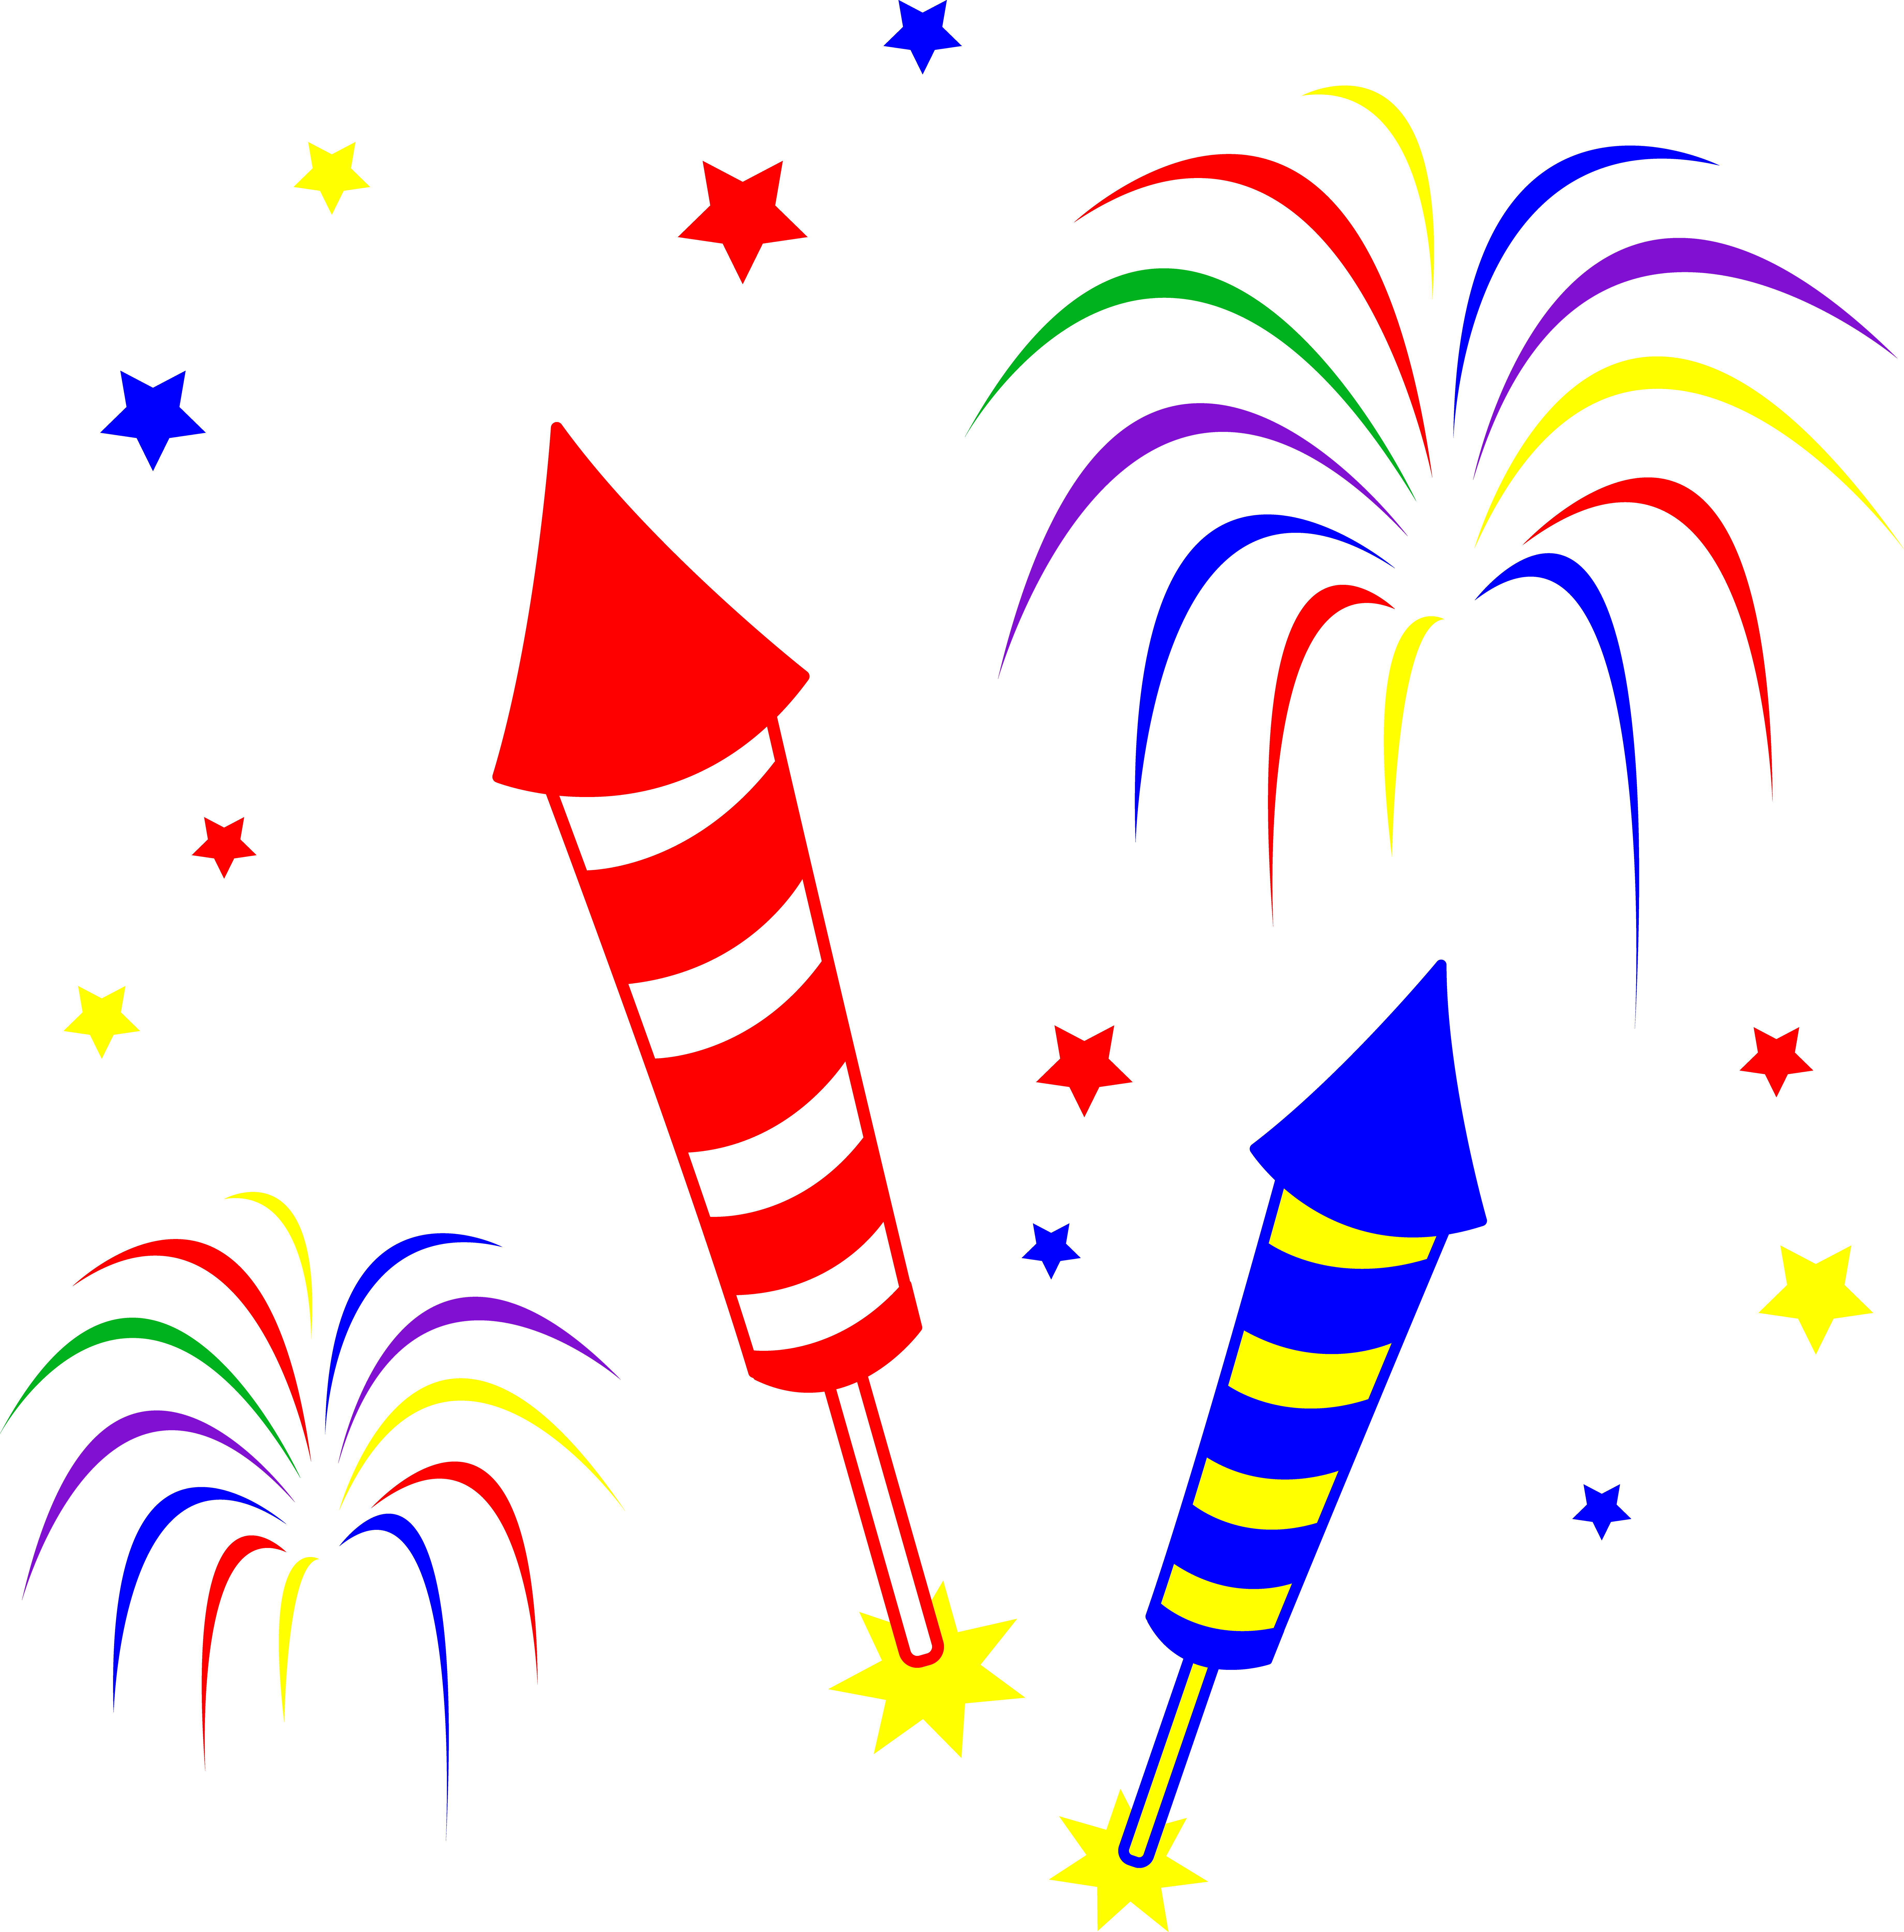 Fireworks Clip Art Animated Free | Clipart Panda - Free Clipart Images